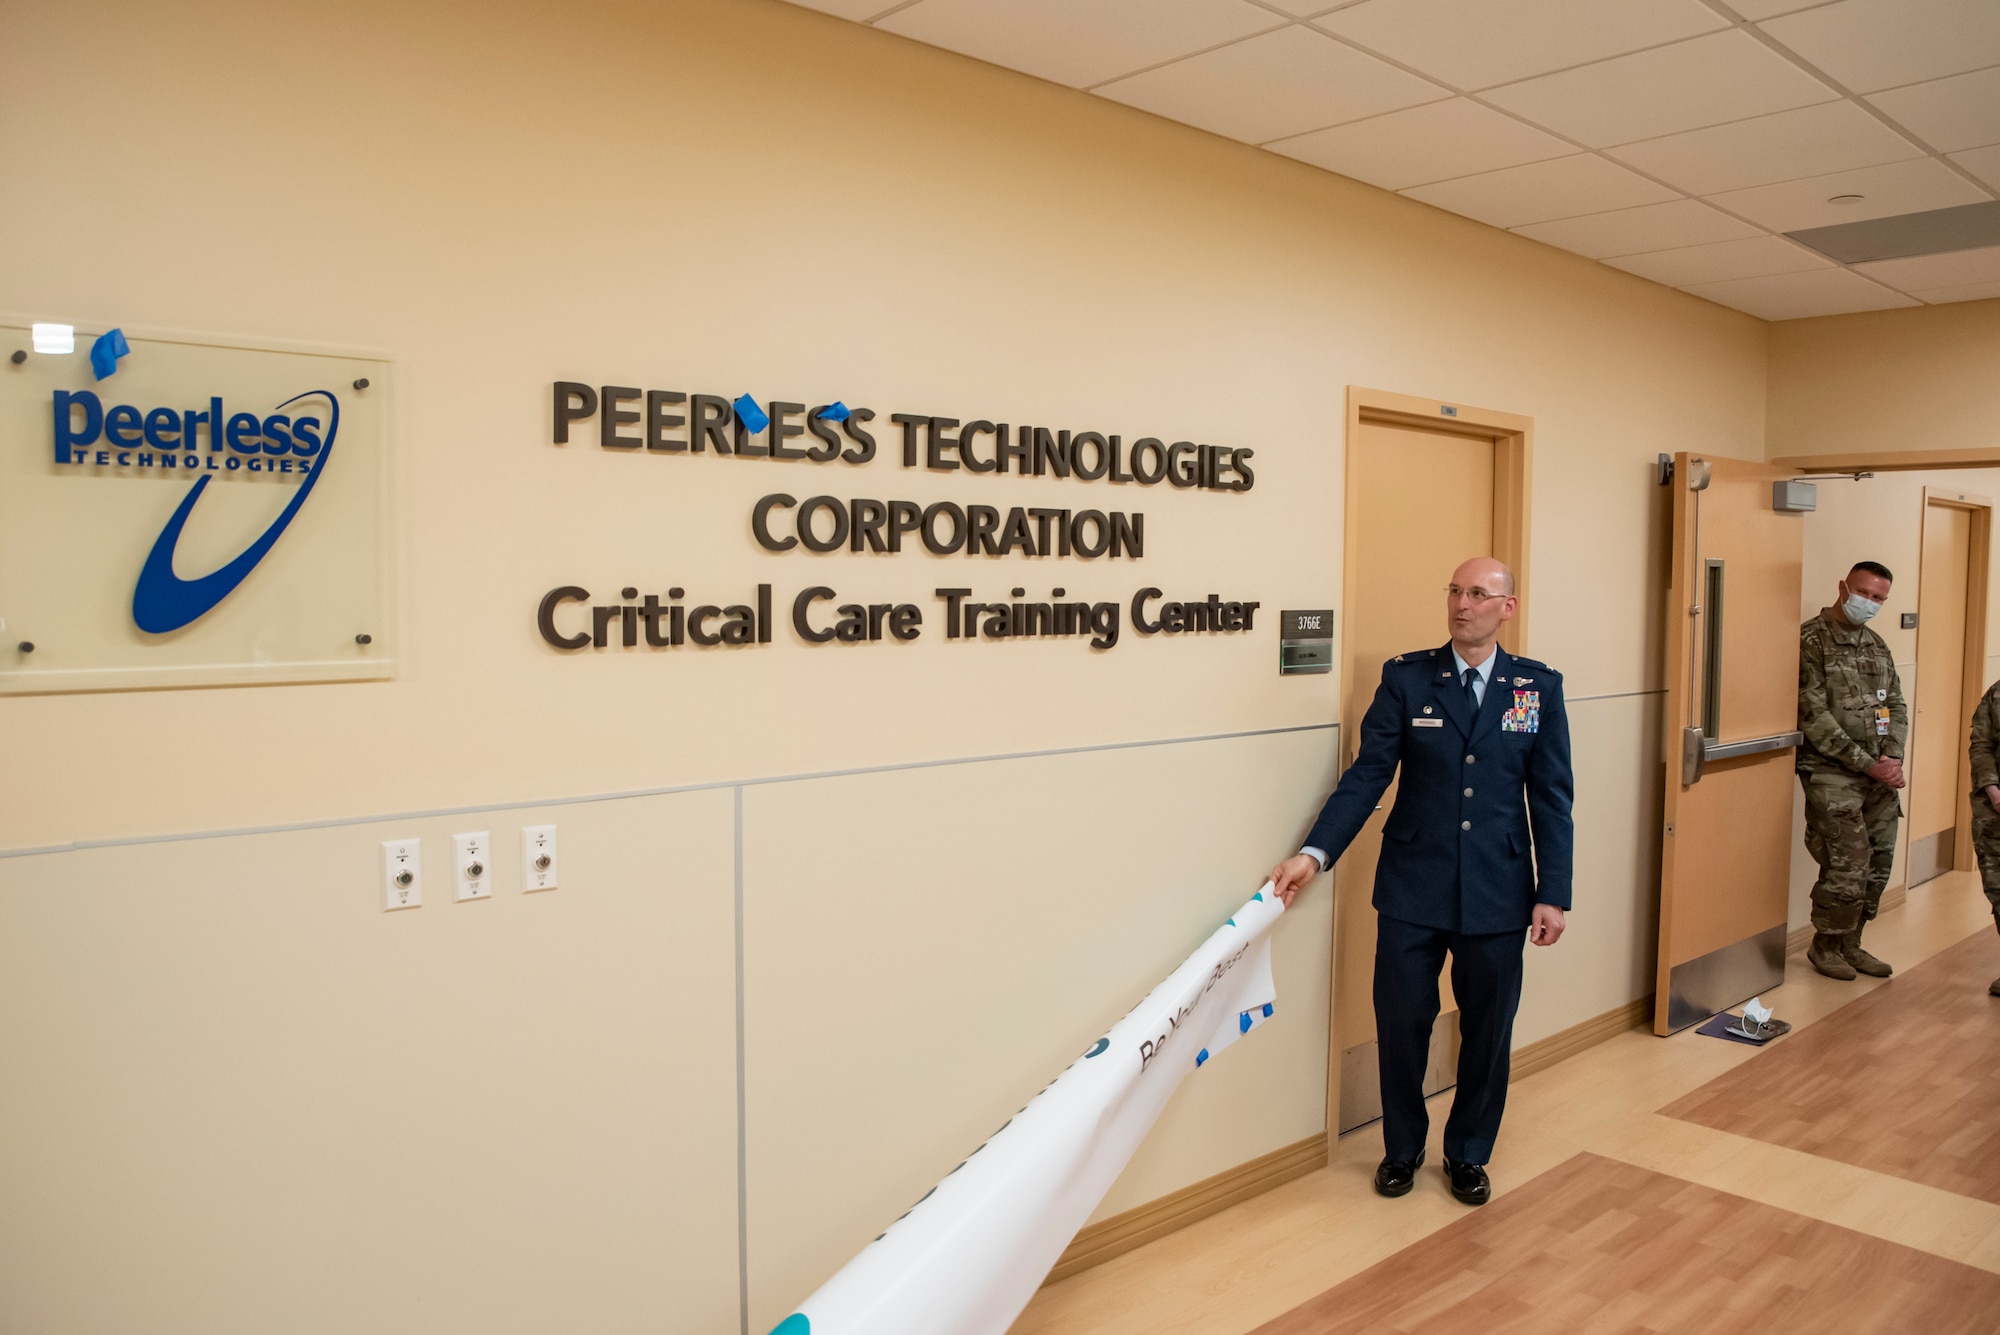 Col. Tory Woodard, center, commander, U.S. Air Force School of Aerospace Medicine, helps to reveal the new sign distinguishing the official opening of the Enlisted Critical Care Course (EECC) at the Soin Medical Center April 13, 2022, in Beavercreek, Ohio. USAFSAM is one of two mission units in the 711th Human Performance Wing, part of the Air Force Research Laboratory (AFRL). AFRL and Kettering Health Network partnered to create a training wing at Soin Medical Center, which allows the Air Force to received training as critical care technicians and also give back to the community. There are 10 courses in a year with 10 technicians each, and the four-week course provides didactics, lectures, simulations and real-patient care. (U.S. Air Force photo / Richard Eldridge)